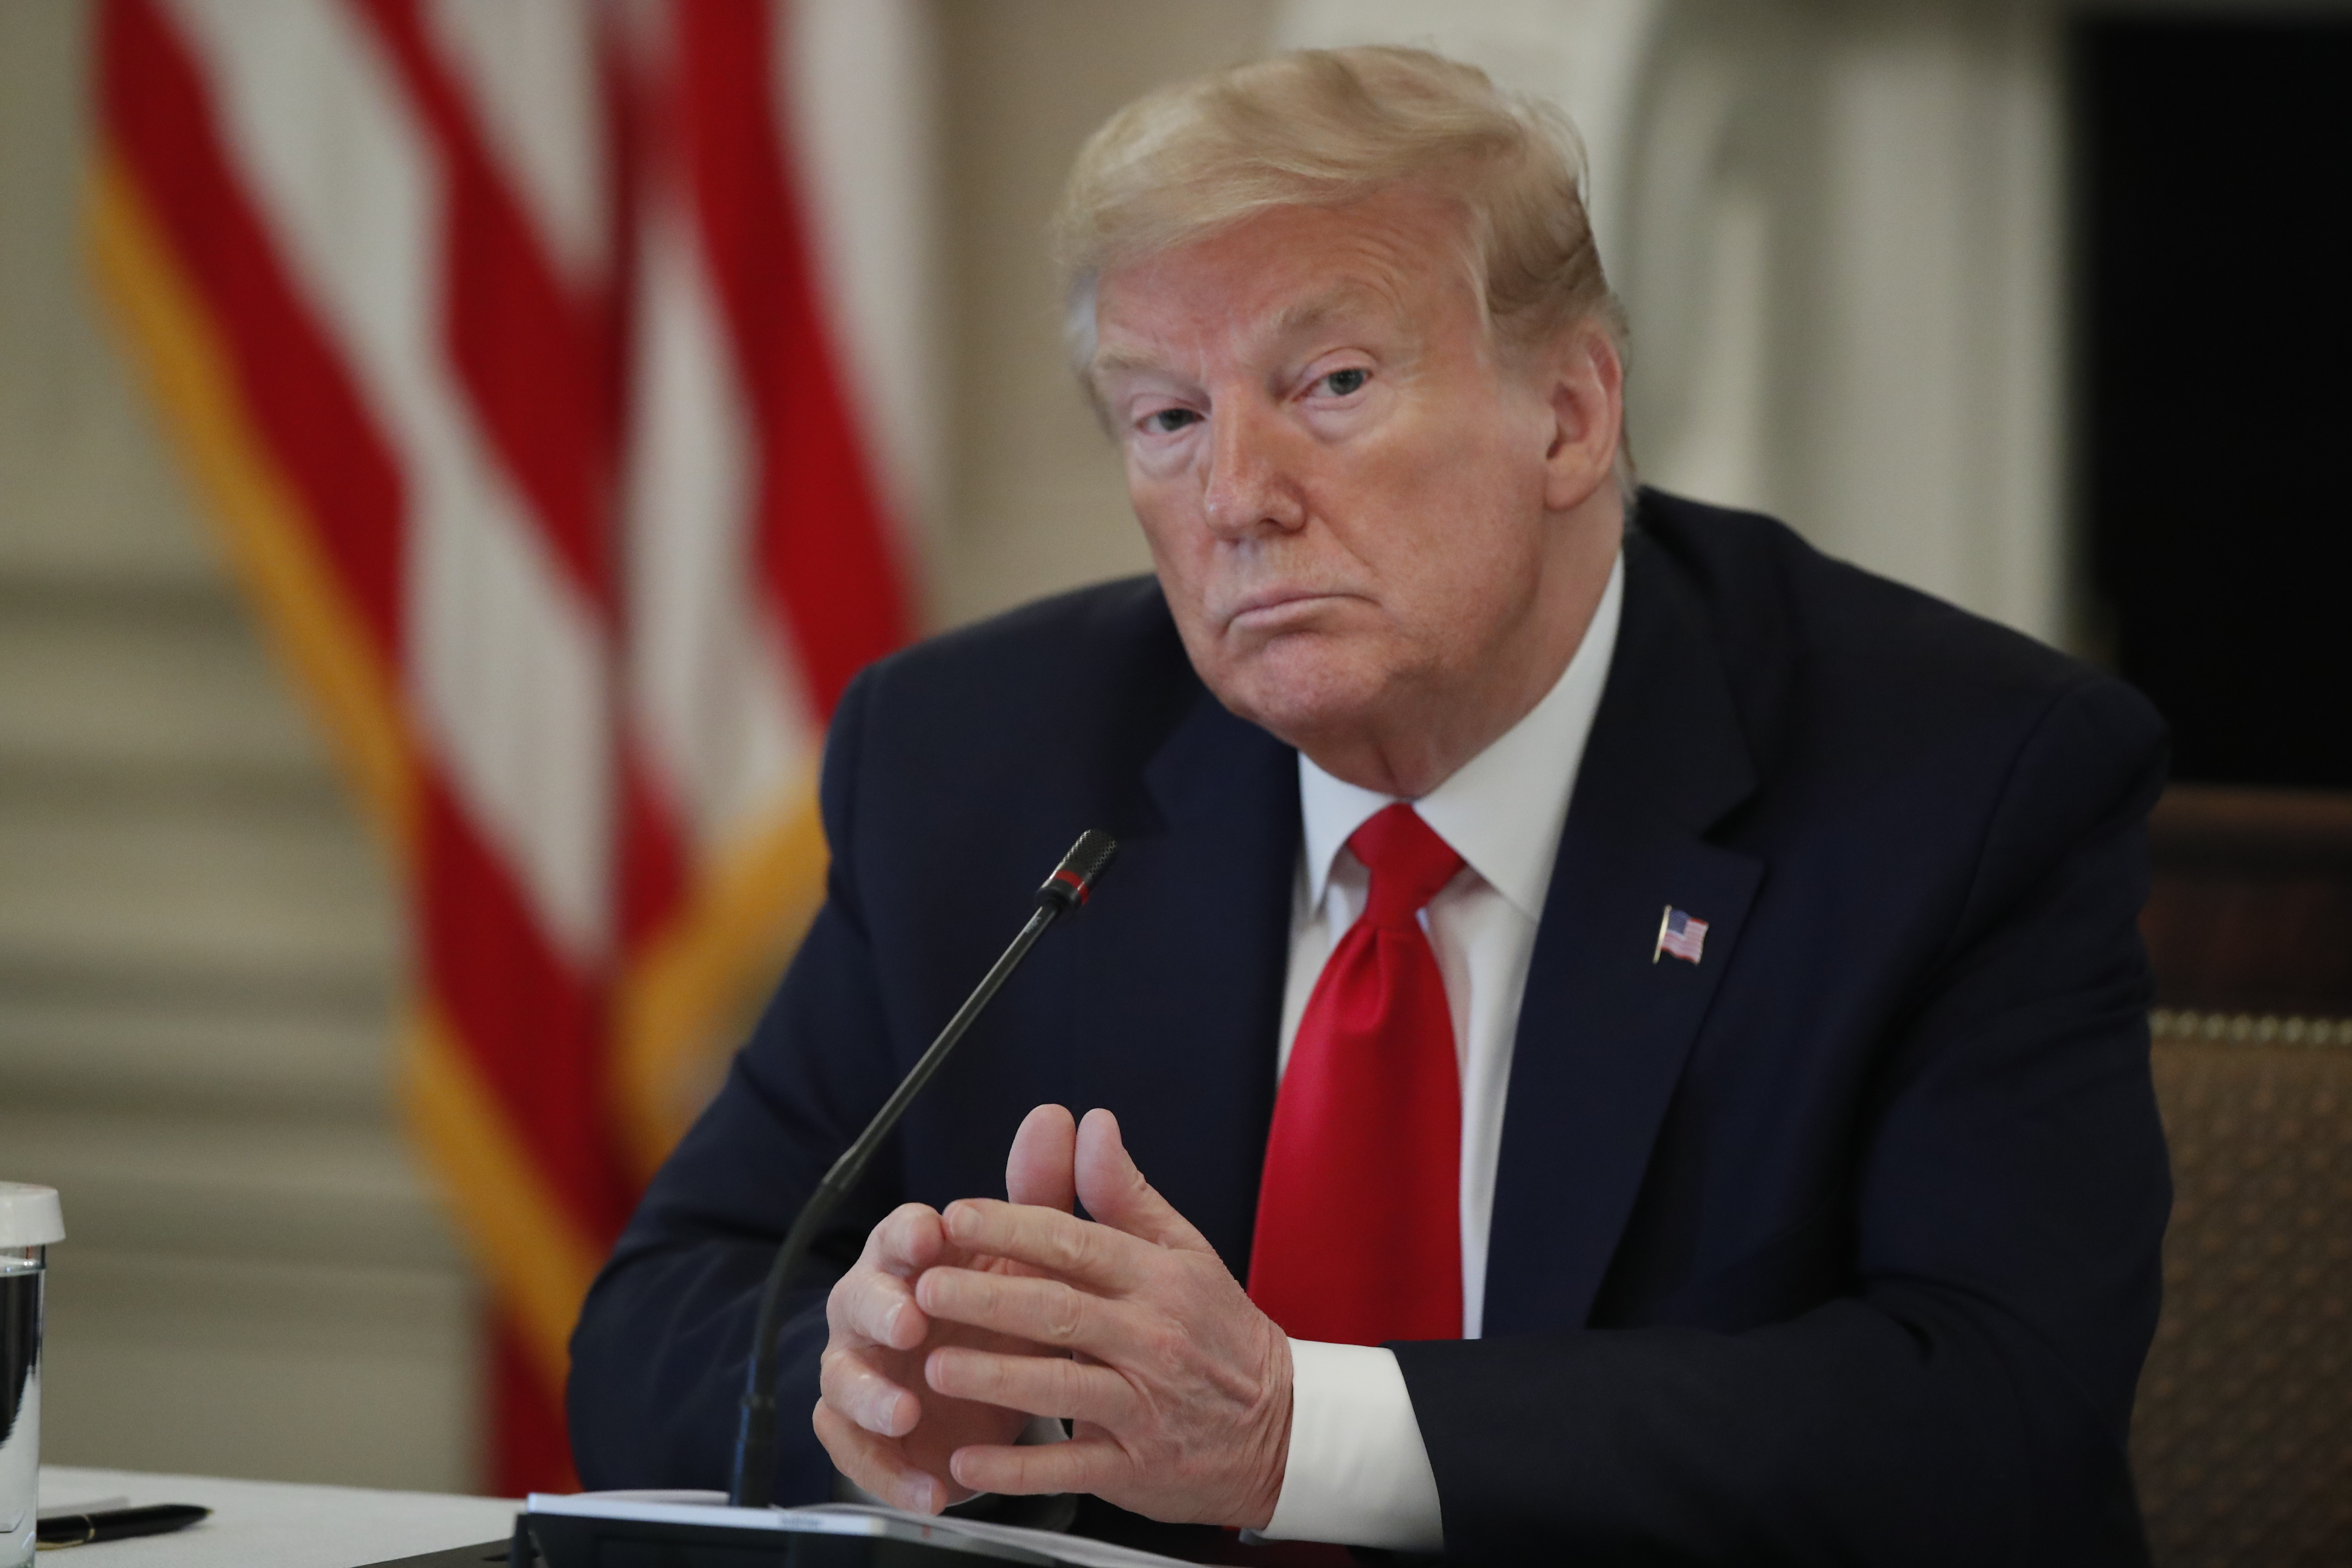 President Donald Trump speaks about reopening the country, during a roundtable with industry executives, in the State Dinning Room of the White House, Wednesday, April 29, 2020, in Washington. Photo: AP